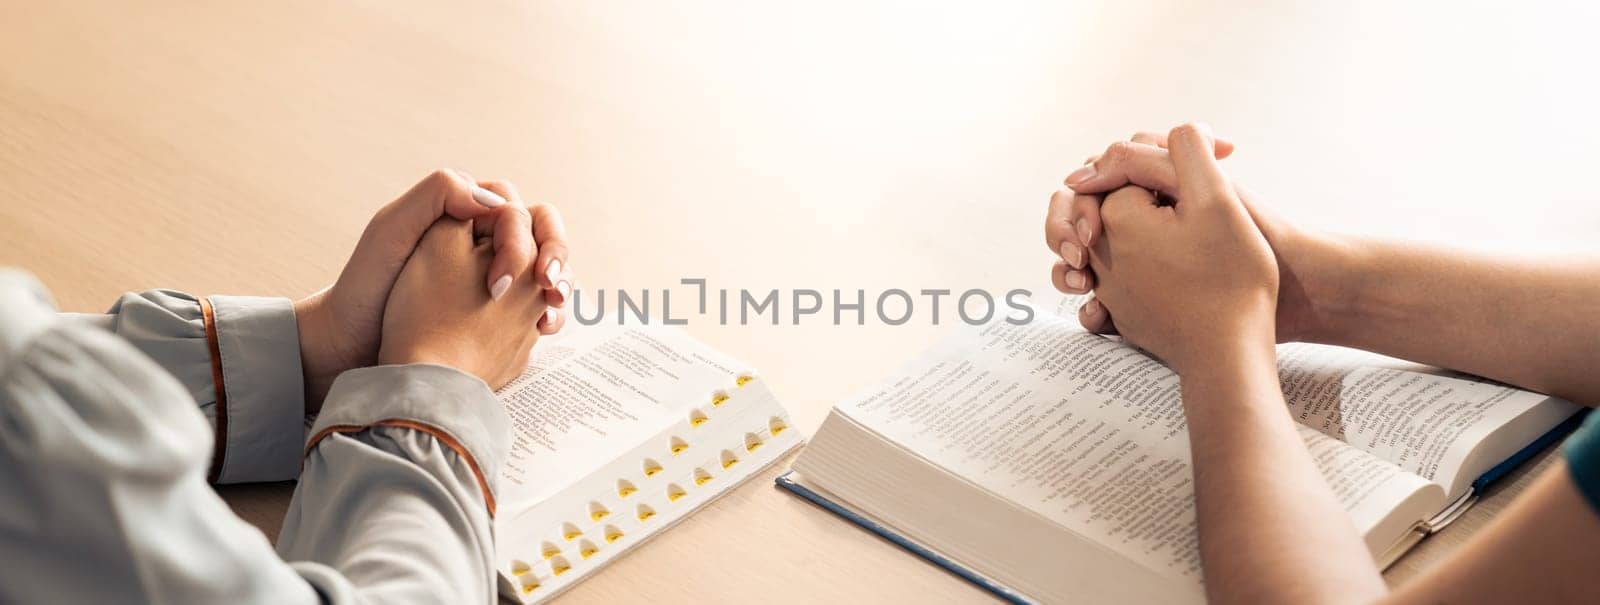 Two believer pray together on holy bible with wooden cross placed. Burgeoning. by biancoblue